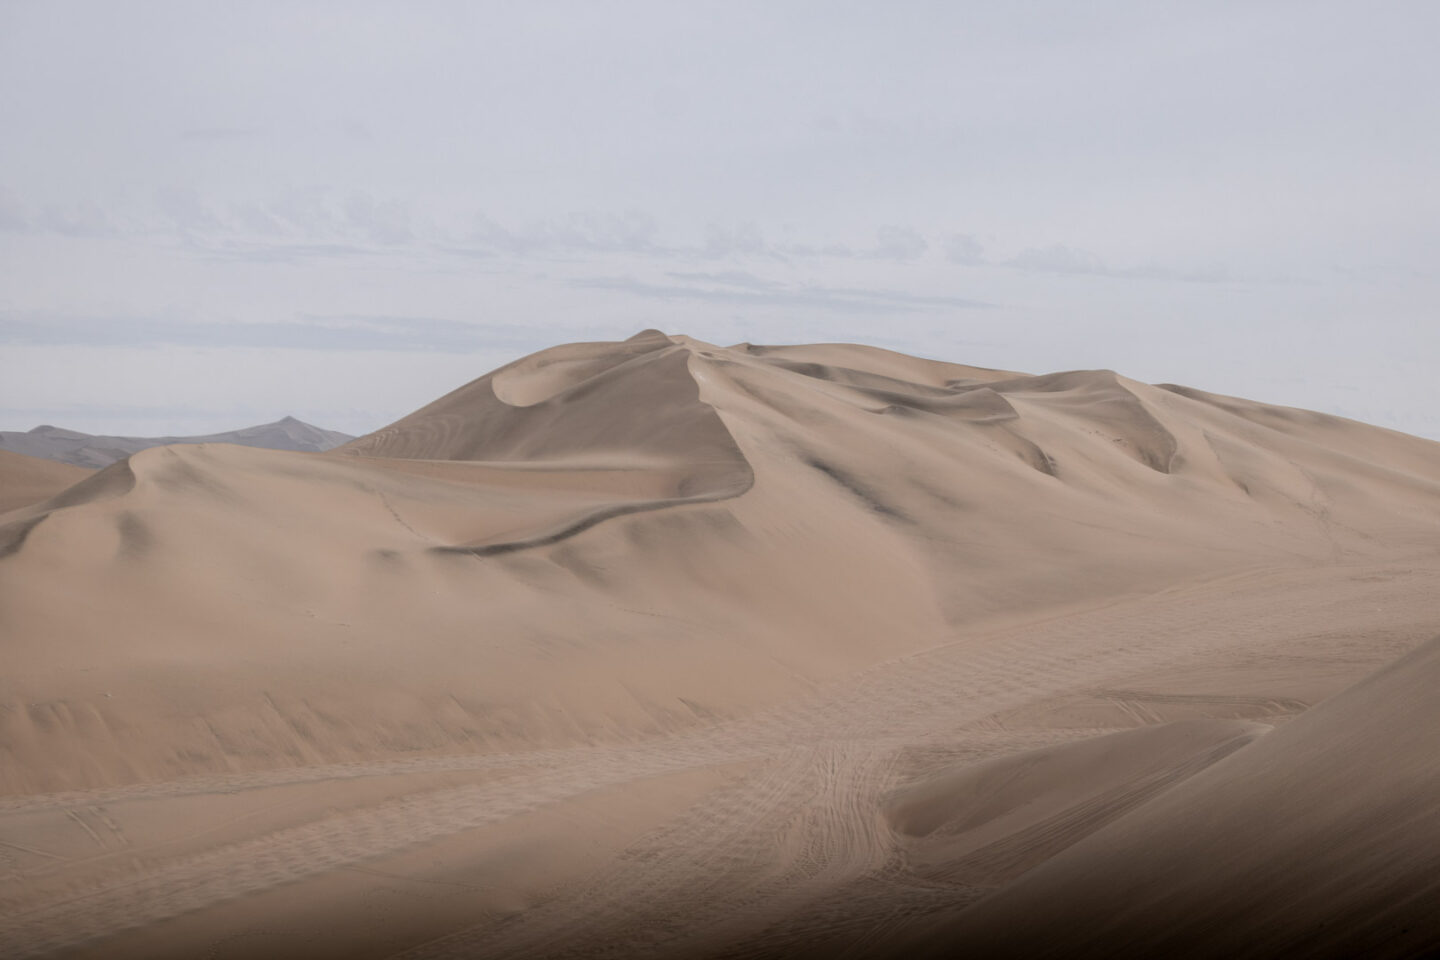 The sand dunes in Huacachina